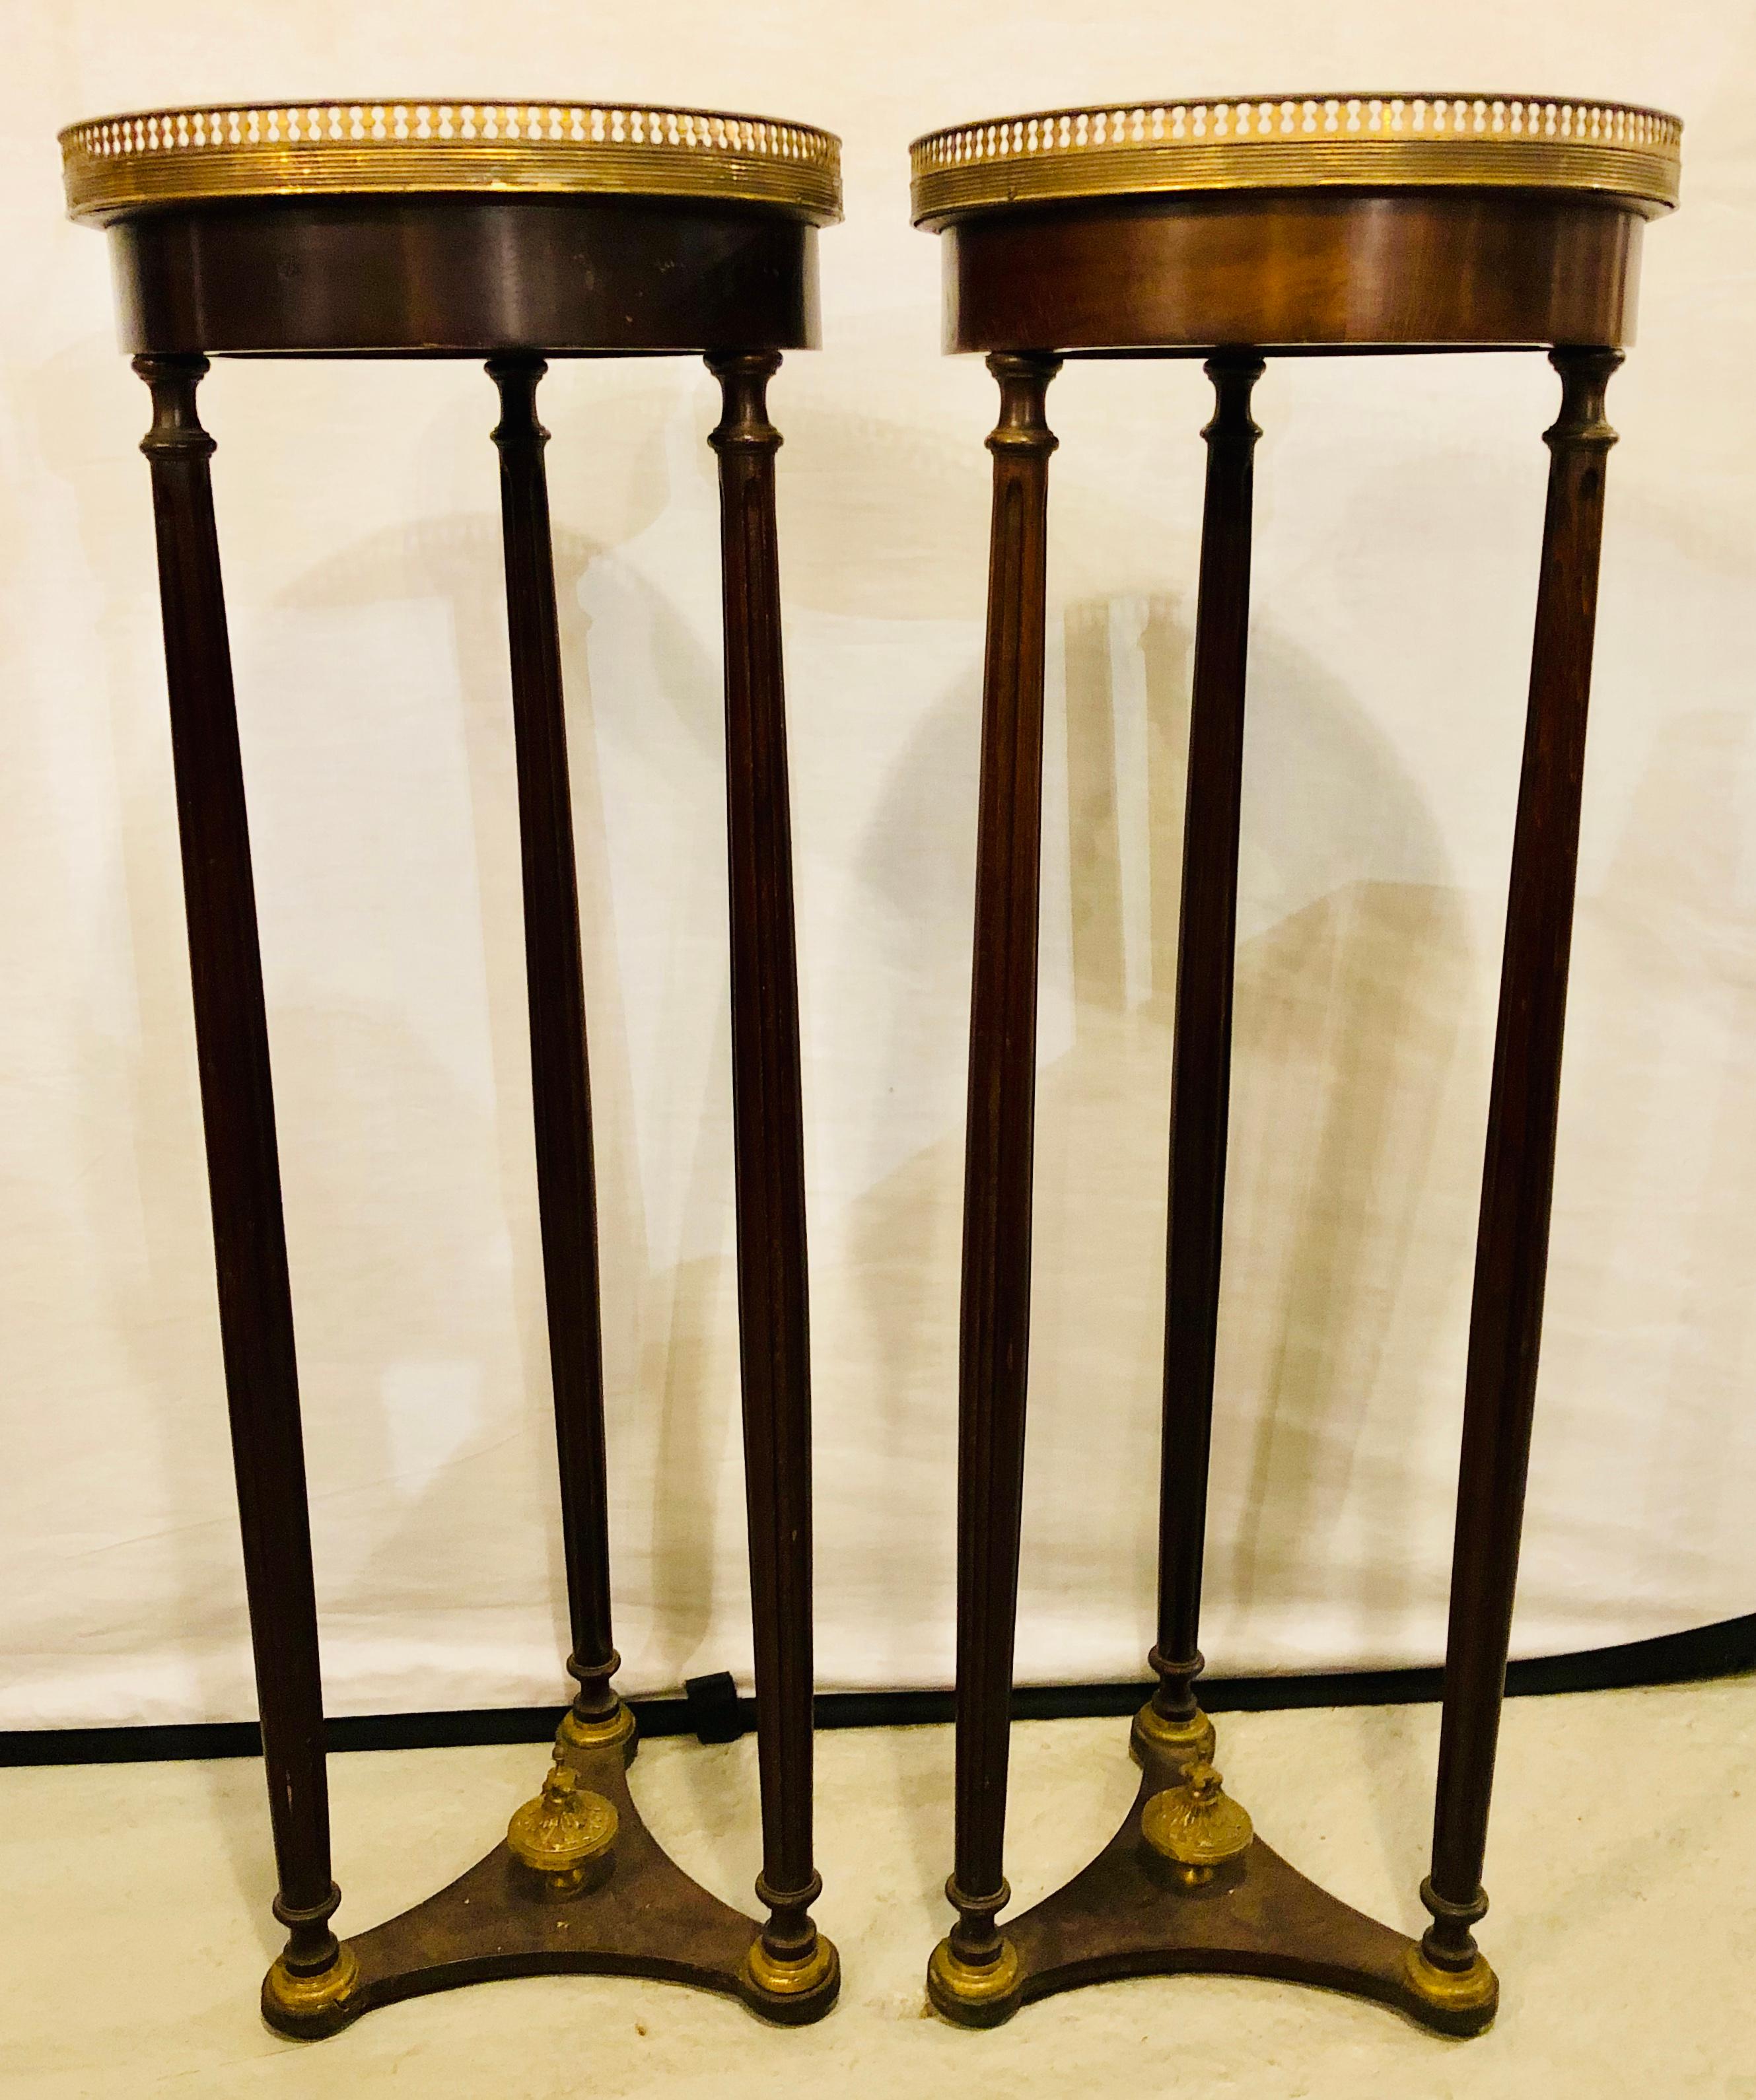 A pair of mahogany Empire marble-top pedestals. Each marble top set in a pierced bronze galley having circular column form legs fastened by a tripod undercarriage with a bronze finial.

Lia\
1gSX/11XA.